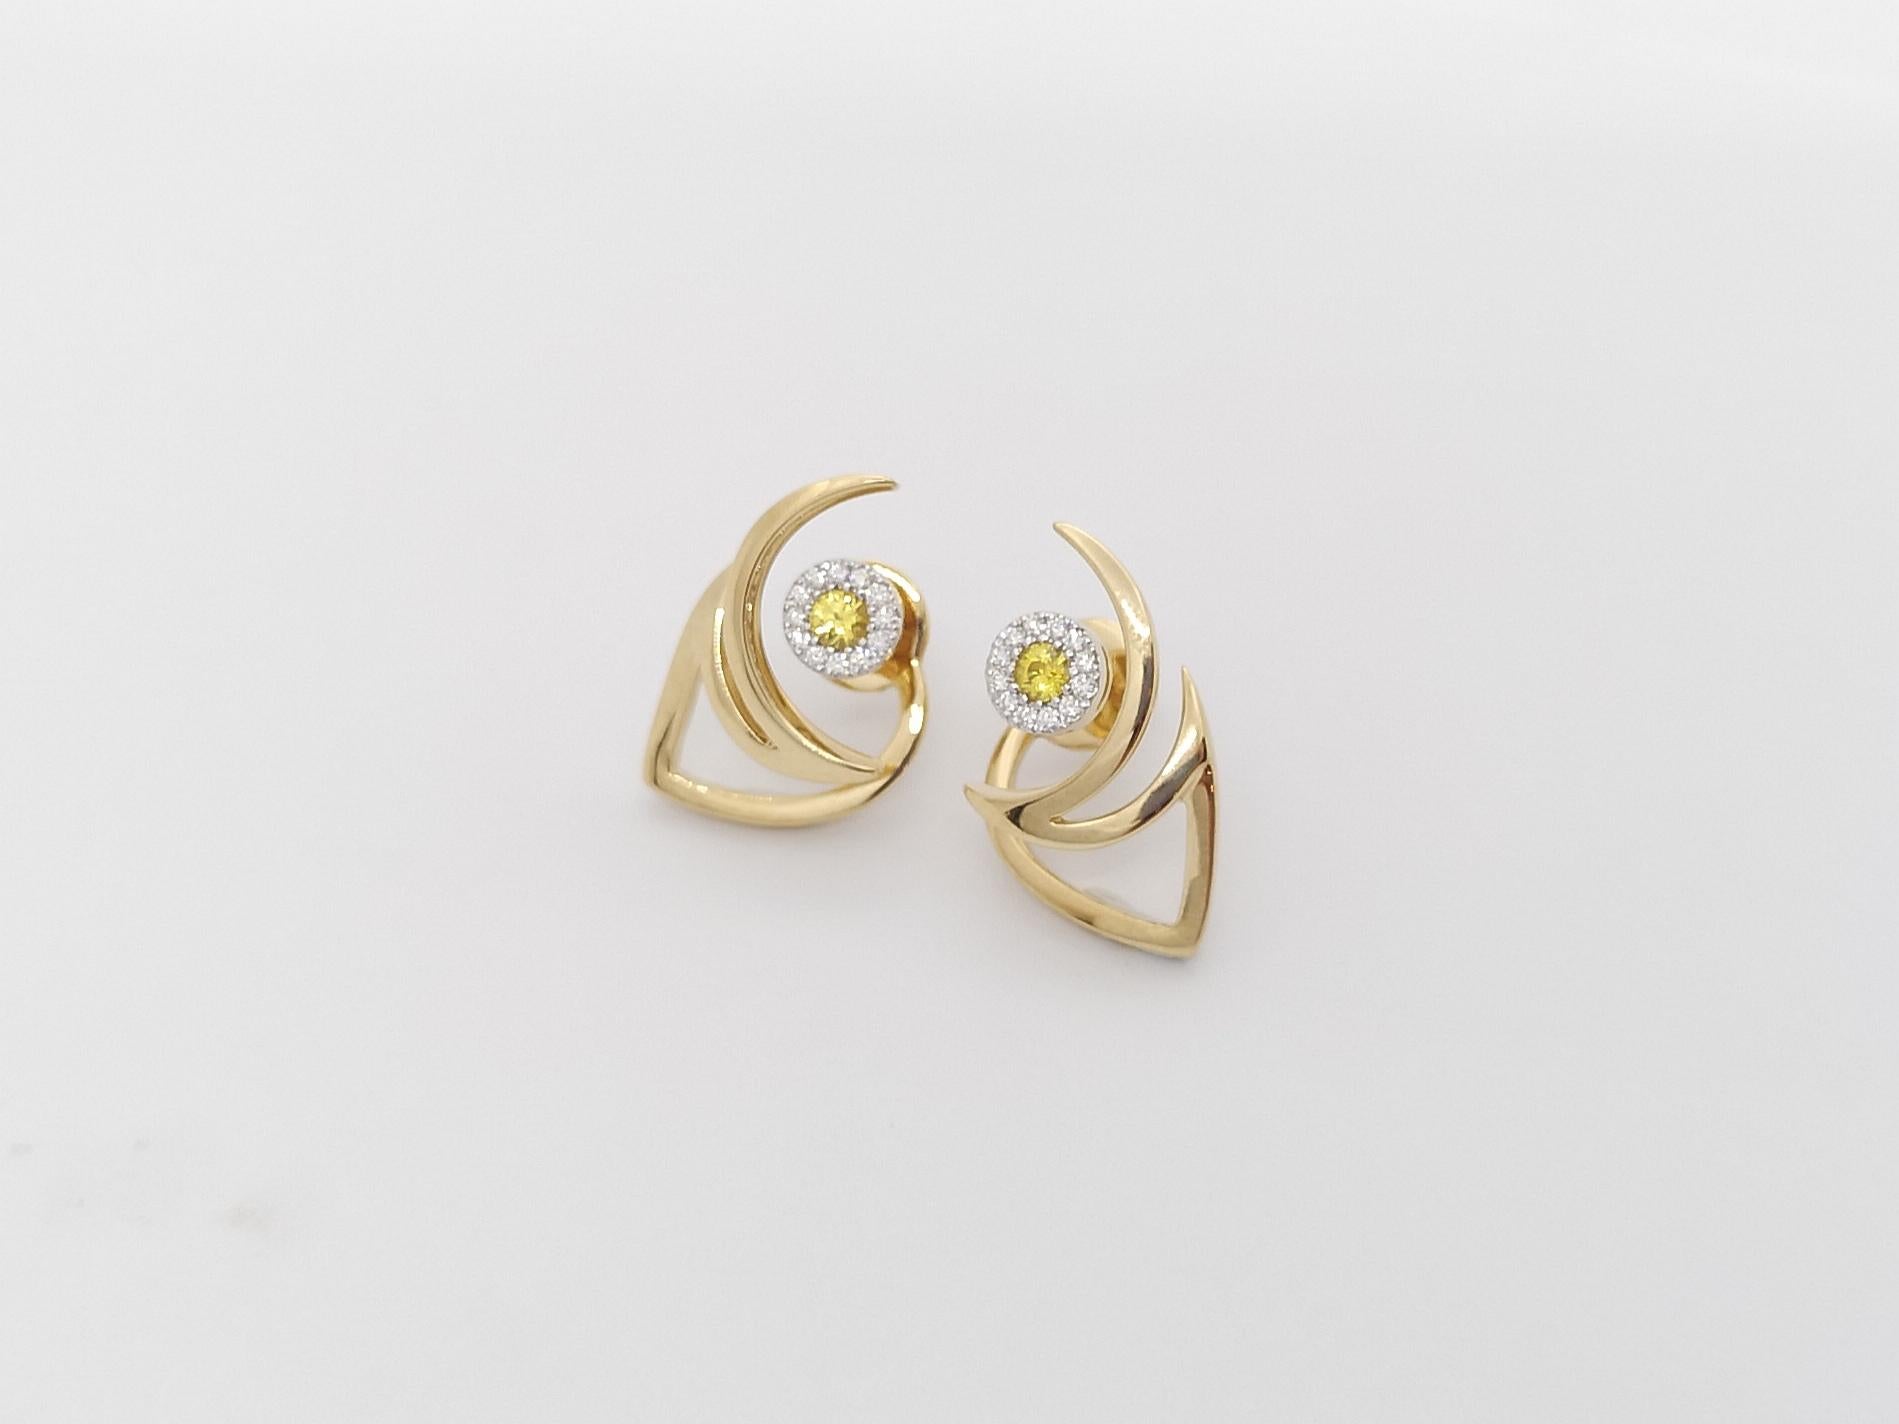 Brilliant Cut Le Phoenix over the Moon Yellow Sapphire and Diamond Earrings 18k Gold For Sale